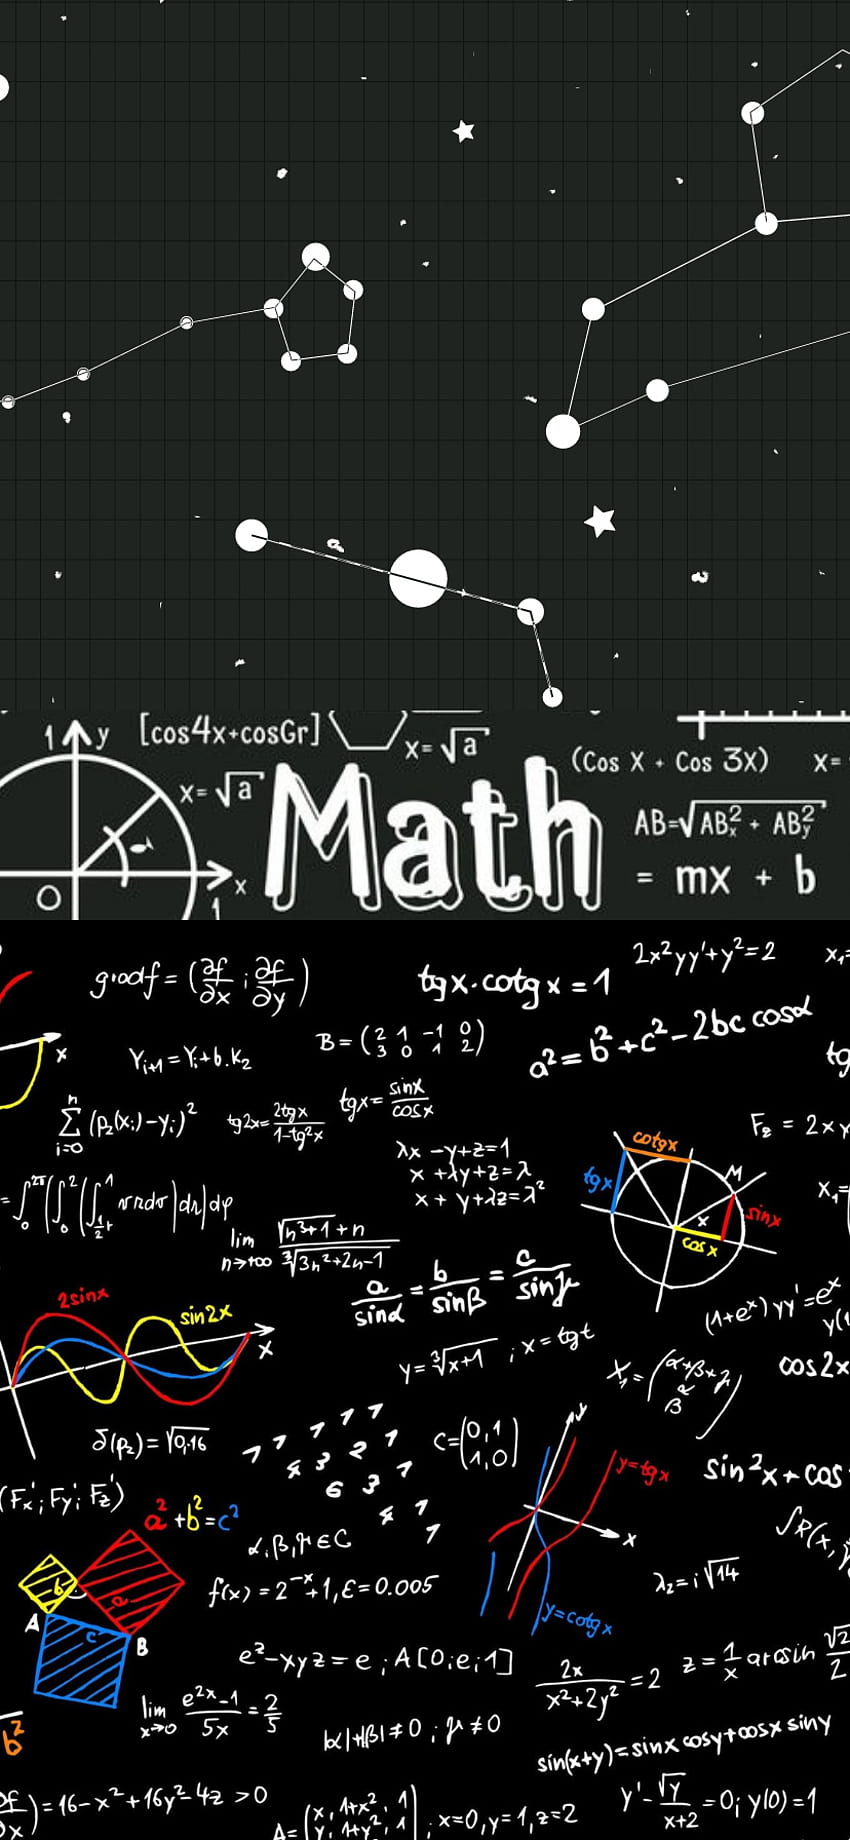 Math wallpaper with formulas, figures and equations. Space background. Blackboard. Handwriting. For any devices - Math